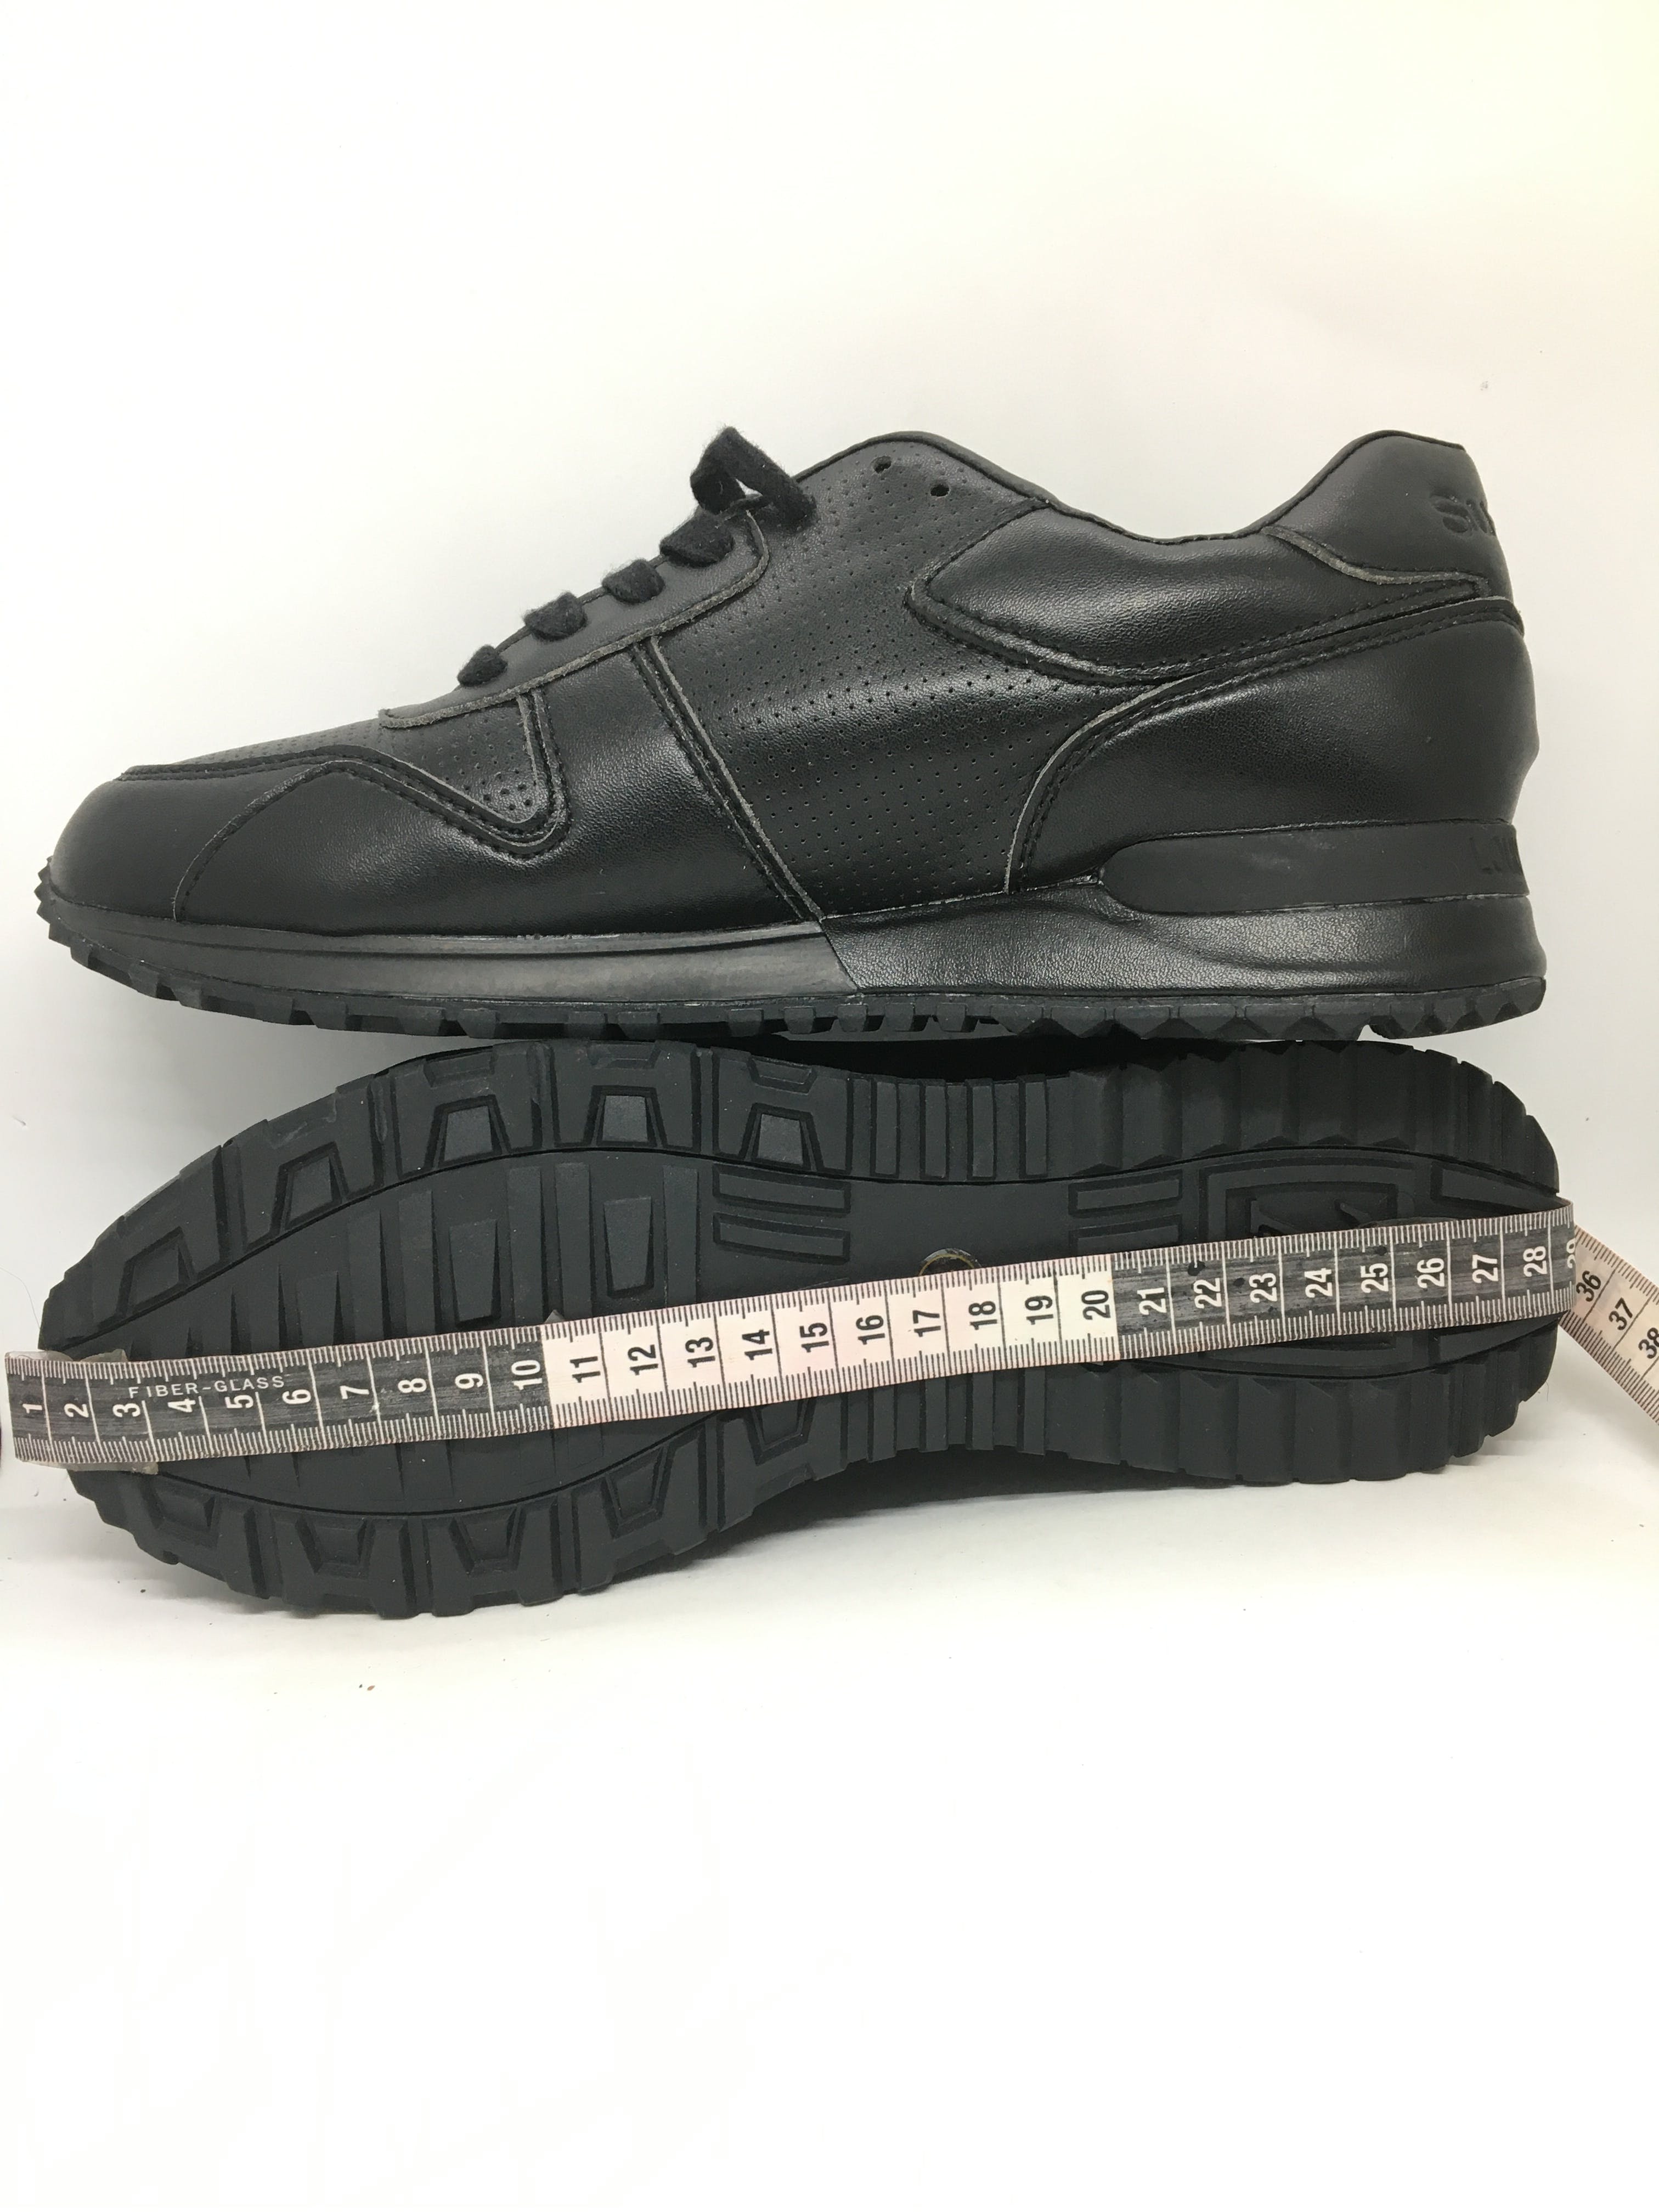 TNF The north face black sneakers size us9 - 7